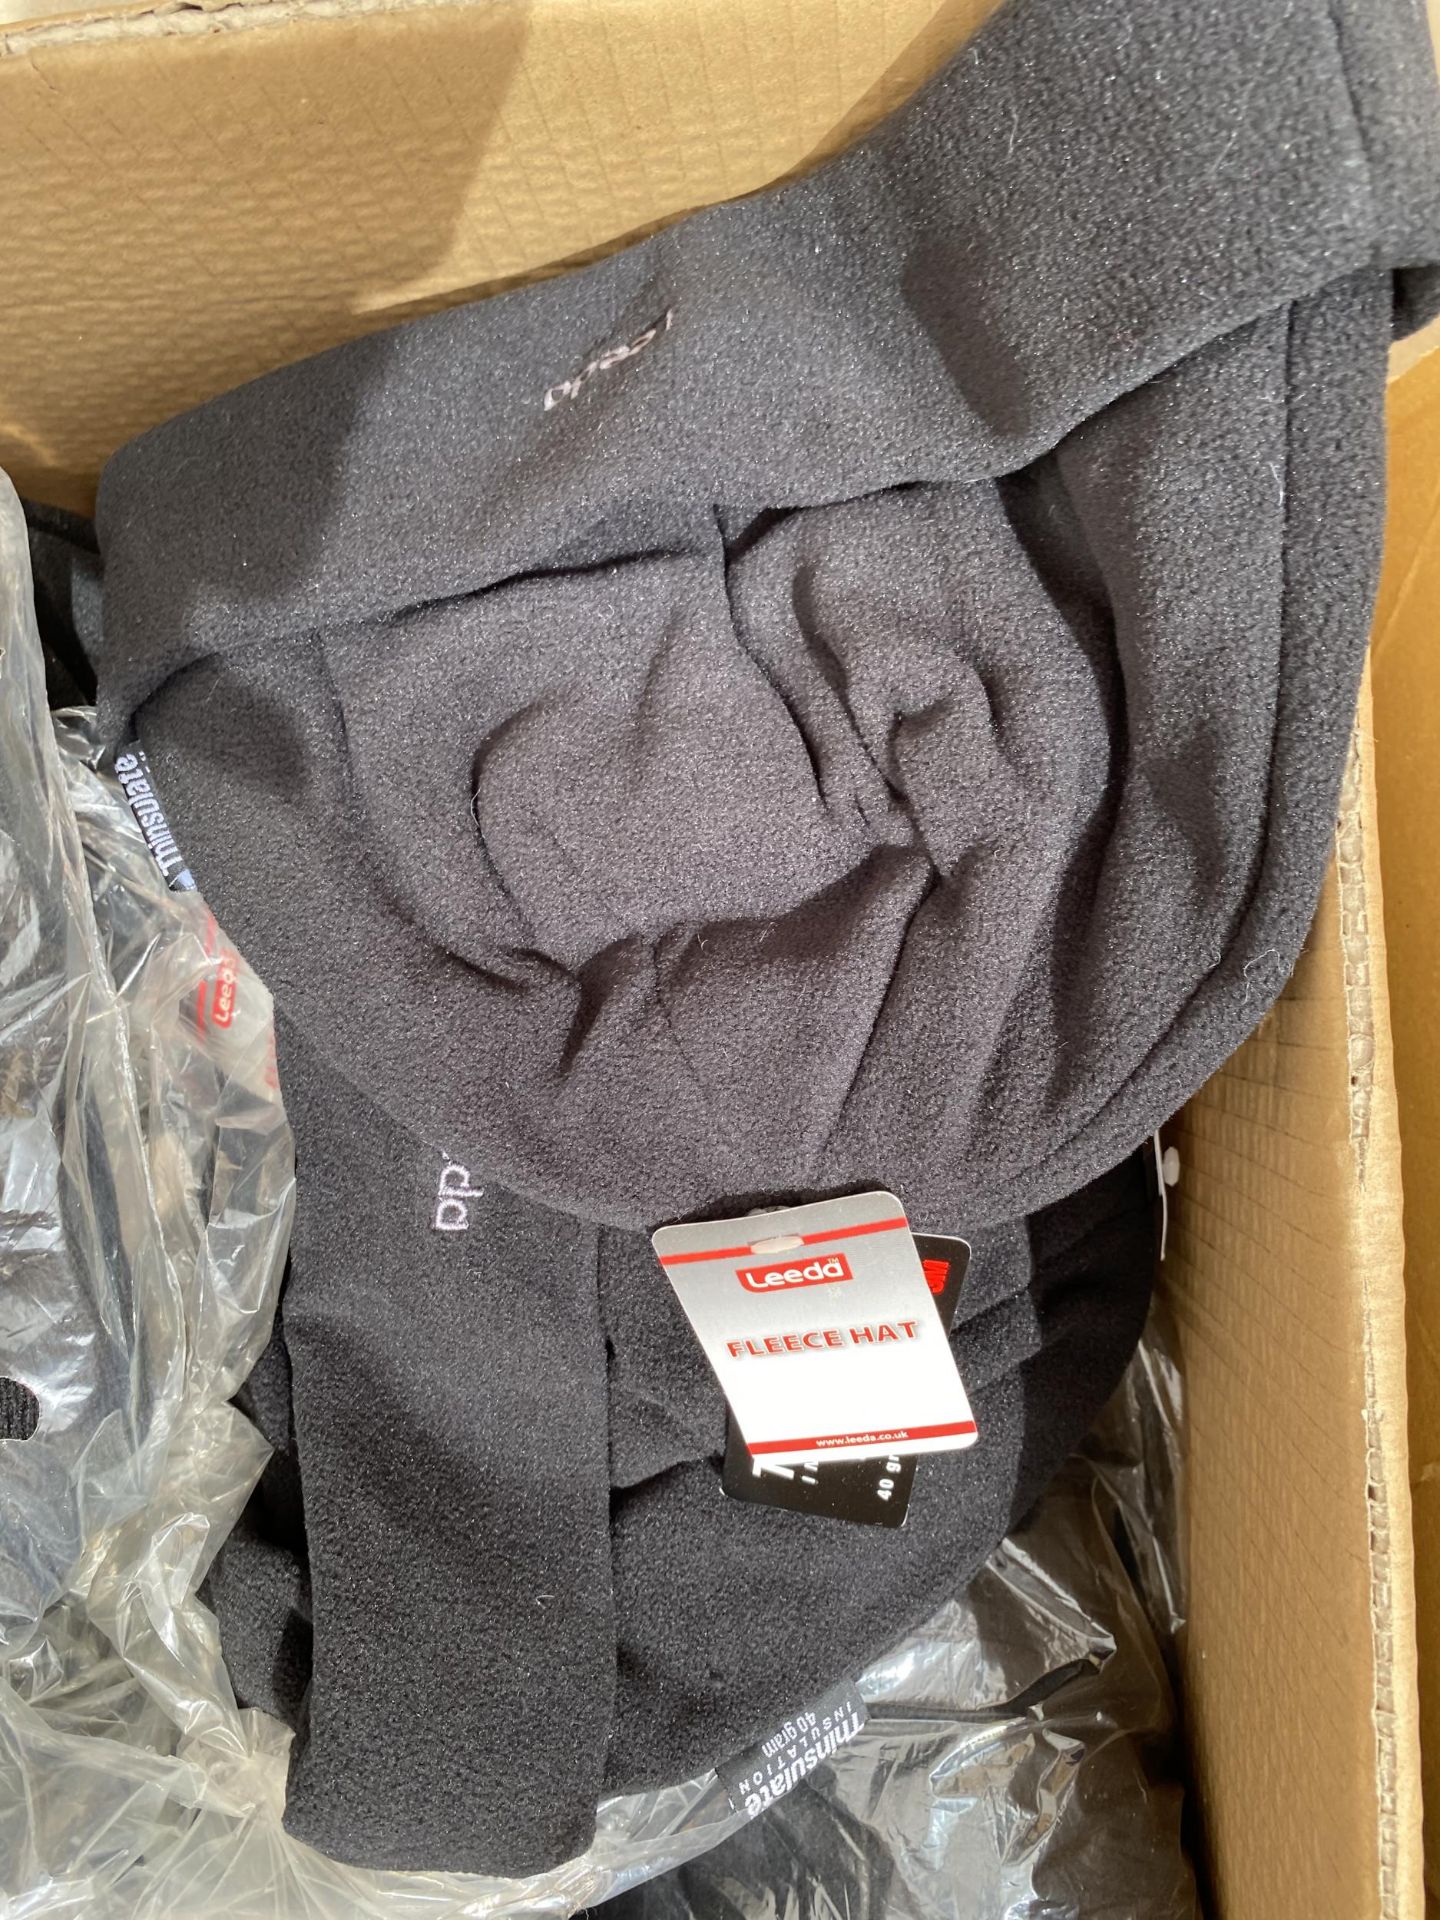 A BOX CONTAINING A LARGE QUANTITY OF AS NEW WOLLY HATS AND FLAT CAPS (FROM A TACKLE SHOP CLEARANCE) - Image 2 of 3